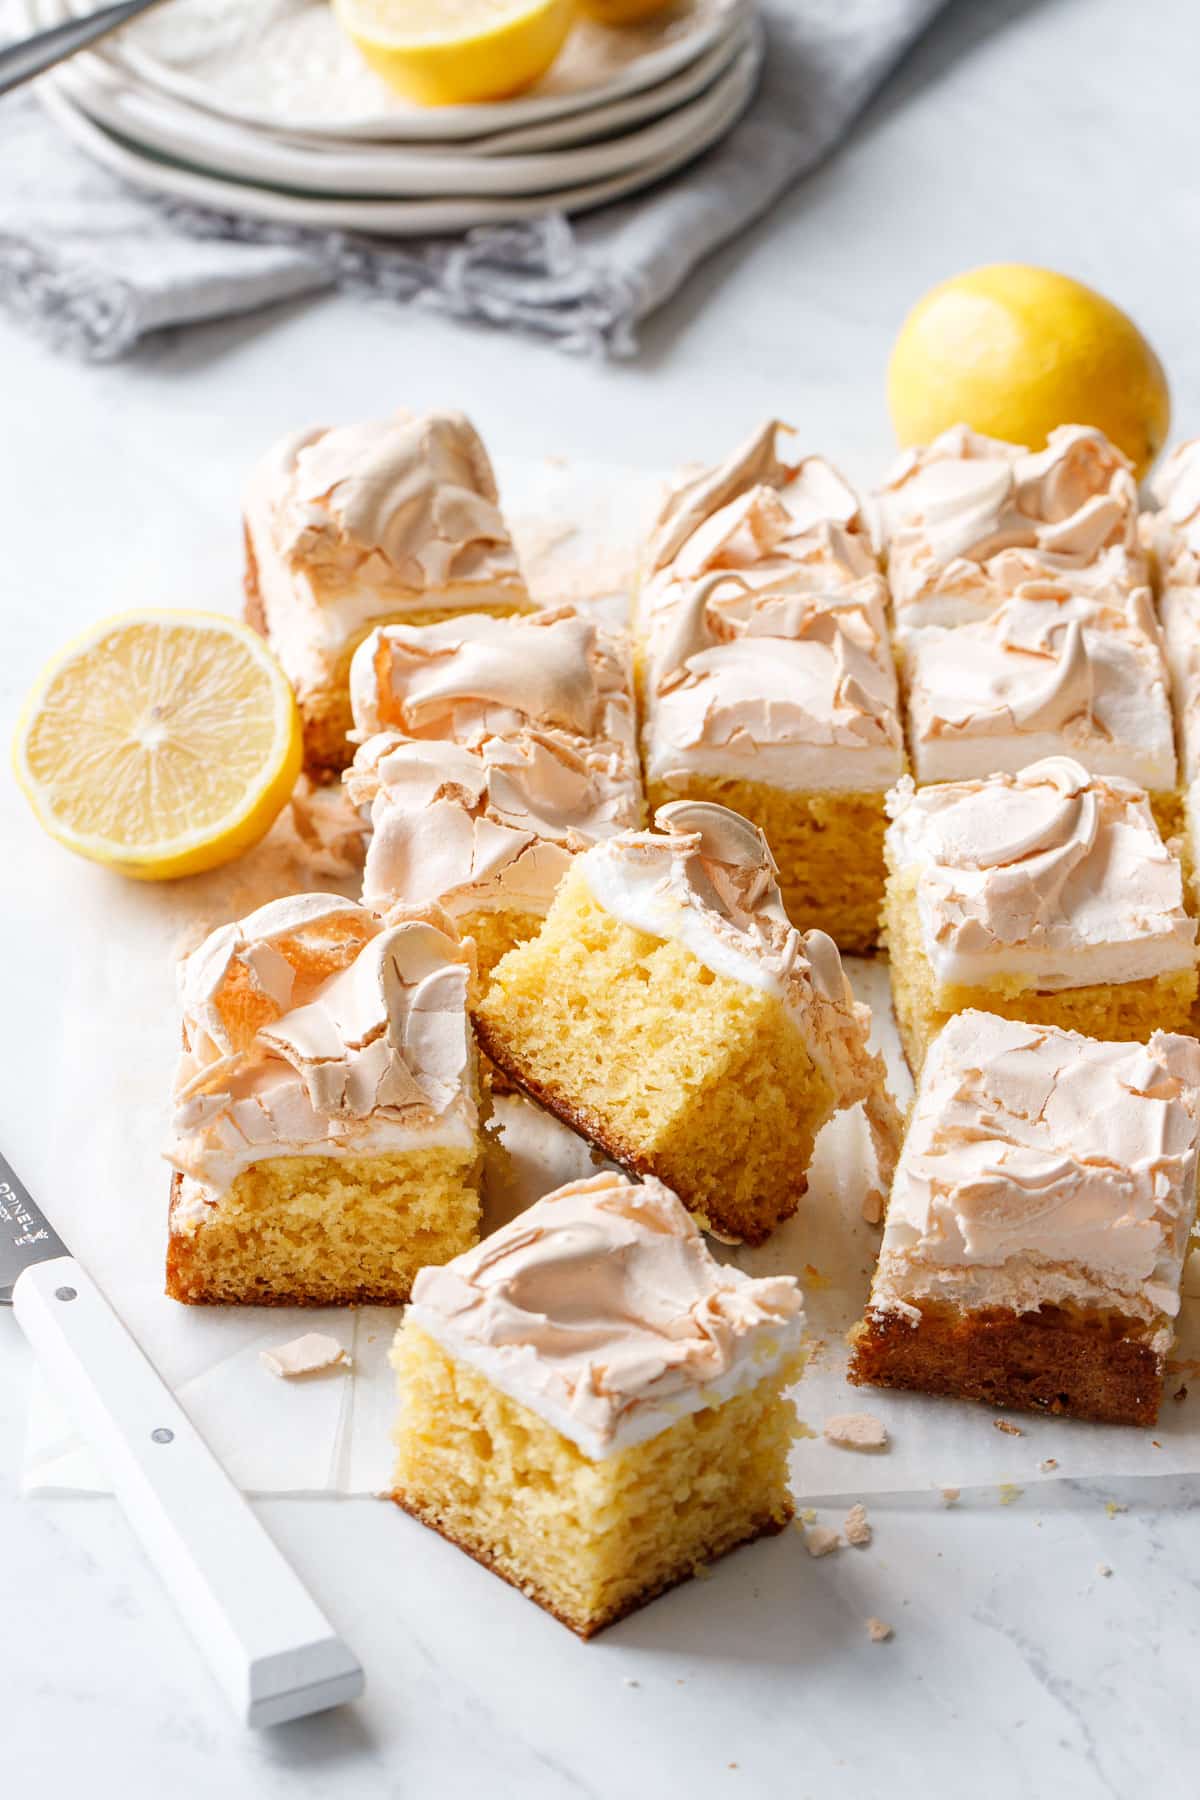 Cut squares of Lemon Meringue Butter Cake on a marble background with white knife and stack of plates in the background.